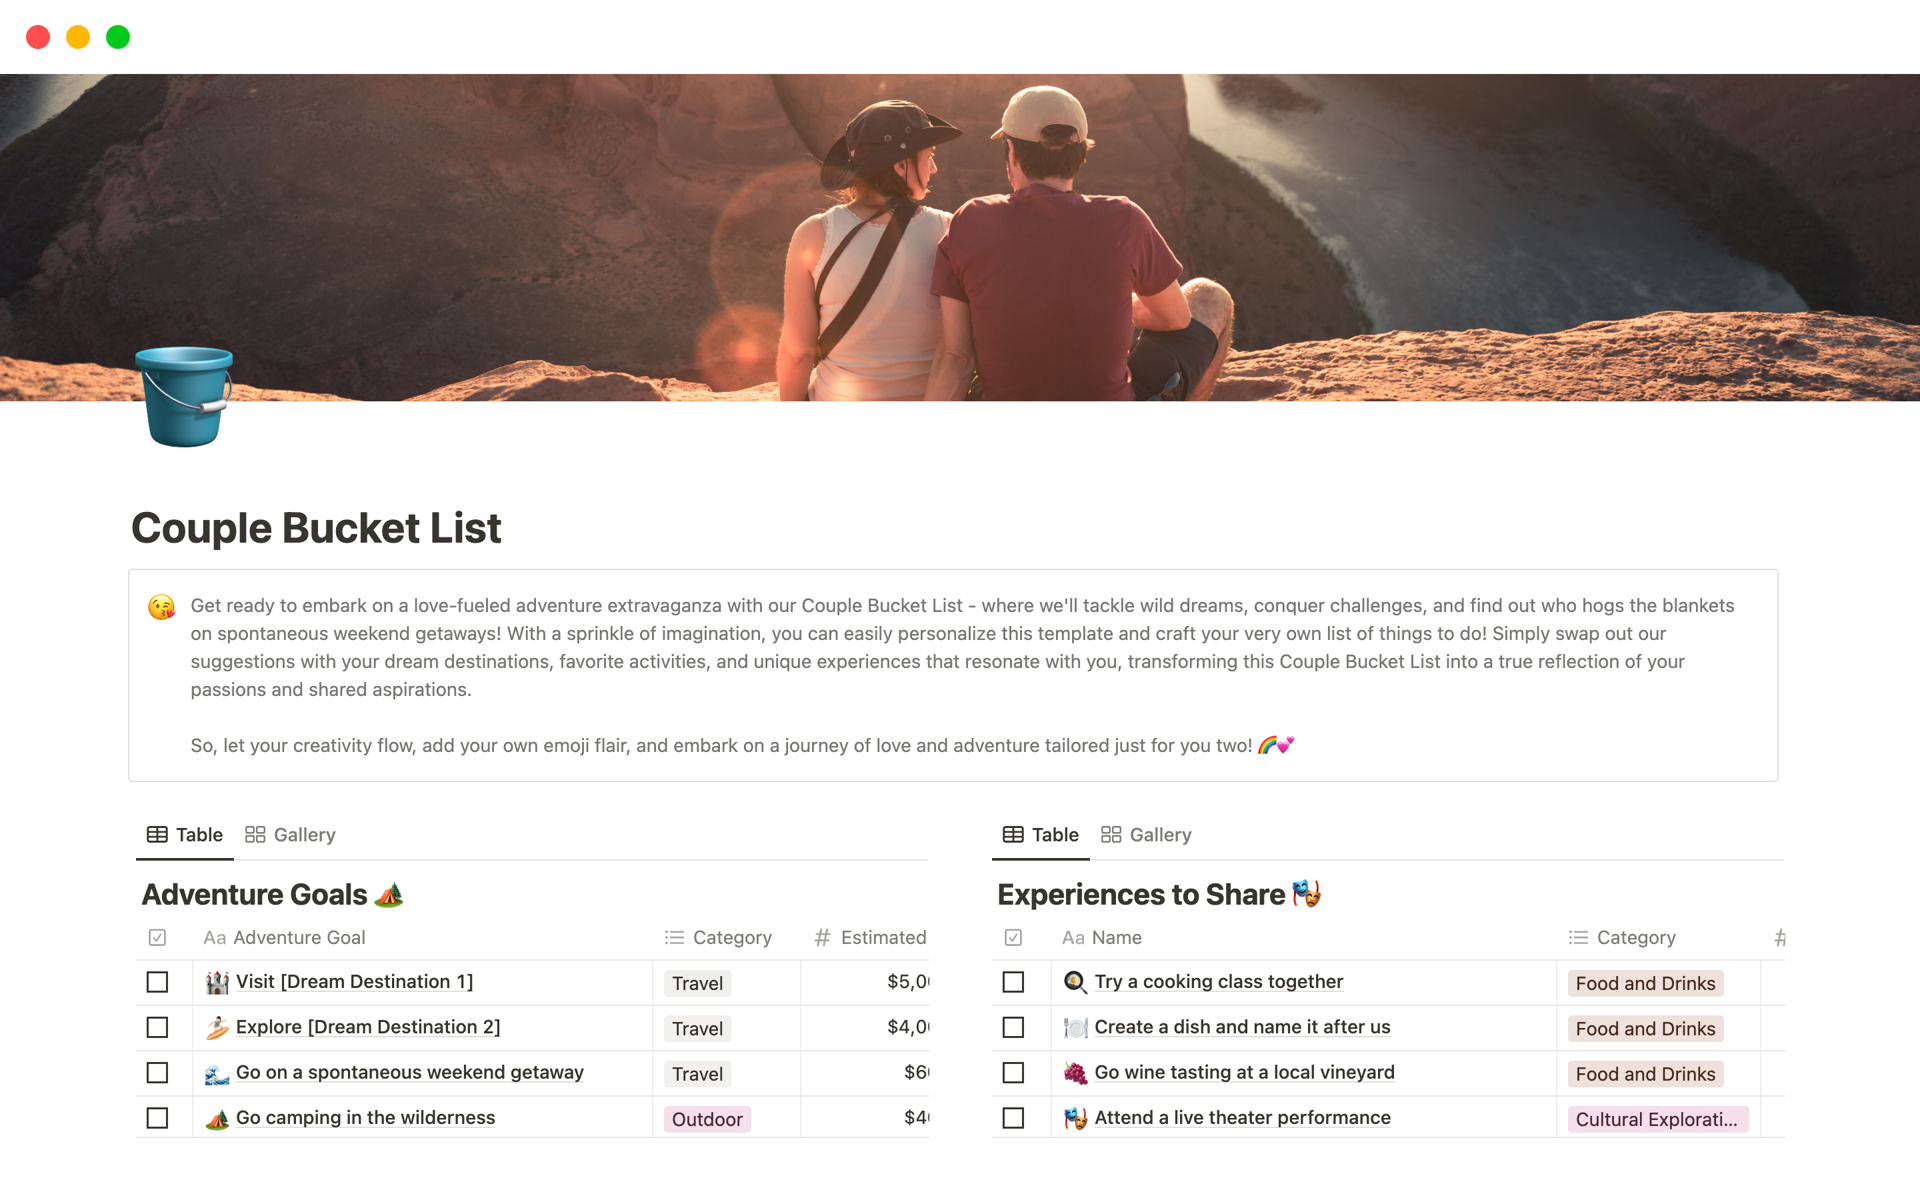 An enchanting Couple Bucket List template where you can weave your love story with personalized adventures and dreams, making it uniquely yours.